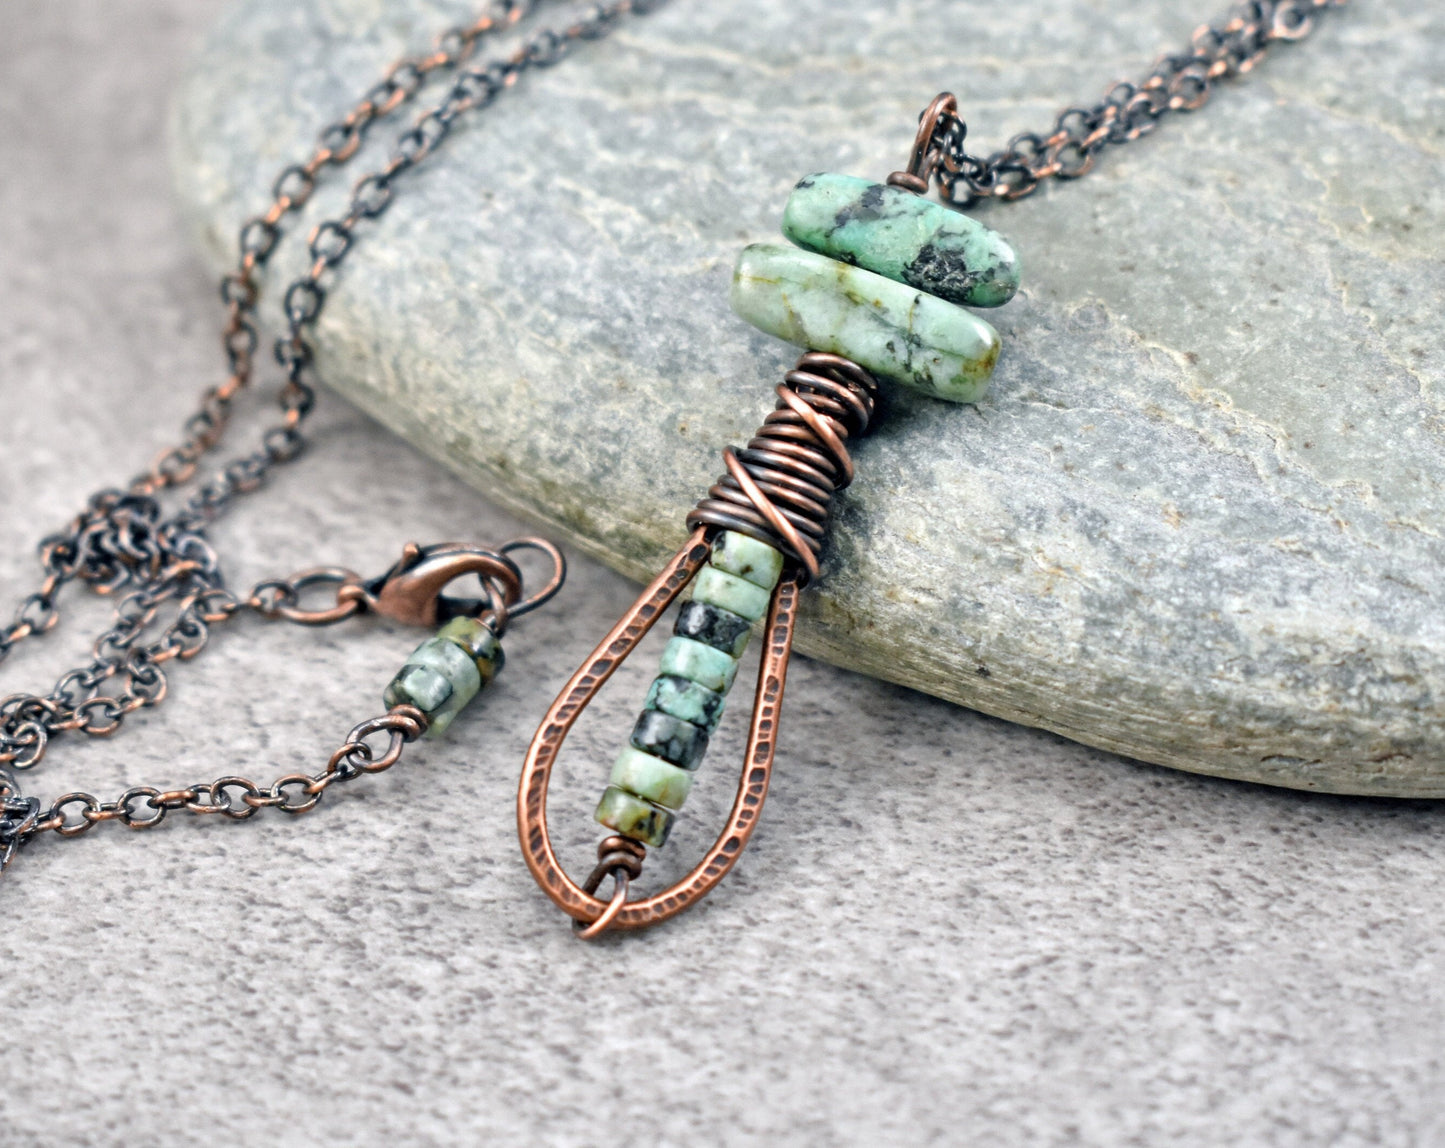 African Turquoise Jasper Pendant, Earthy Green Gemstone Necklace, Artisan Copper Wire Teardrop Jewelry, Unique Natural Stone